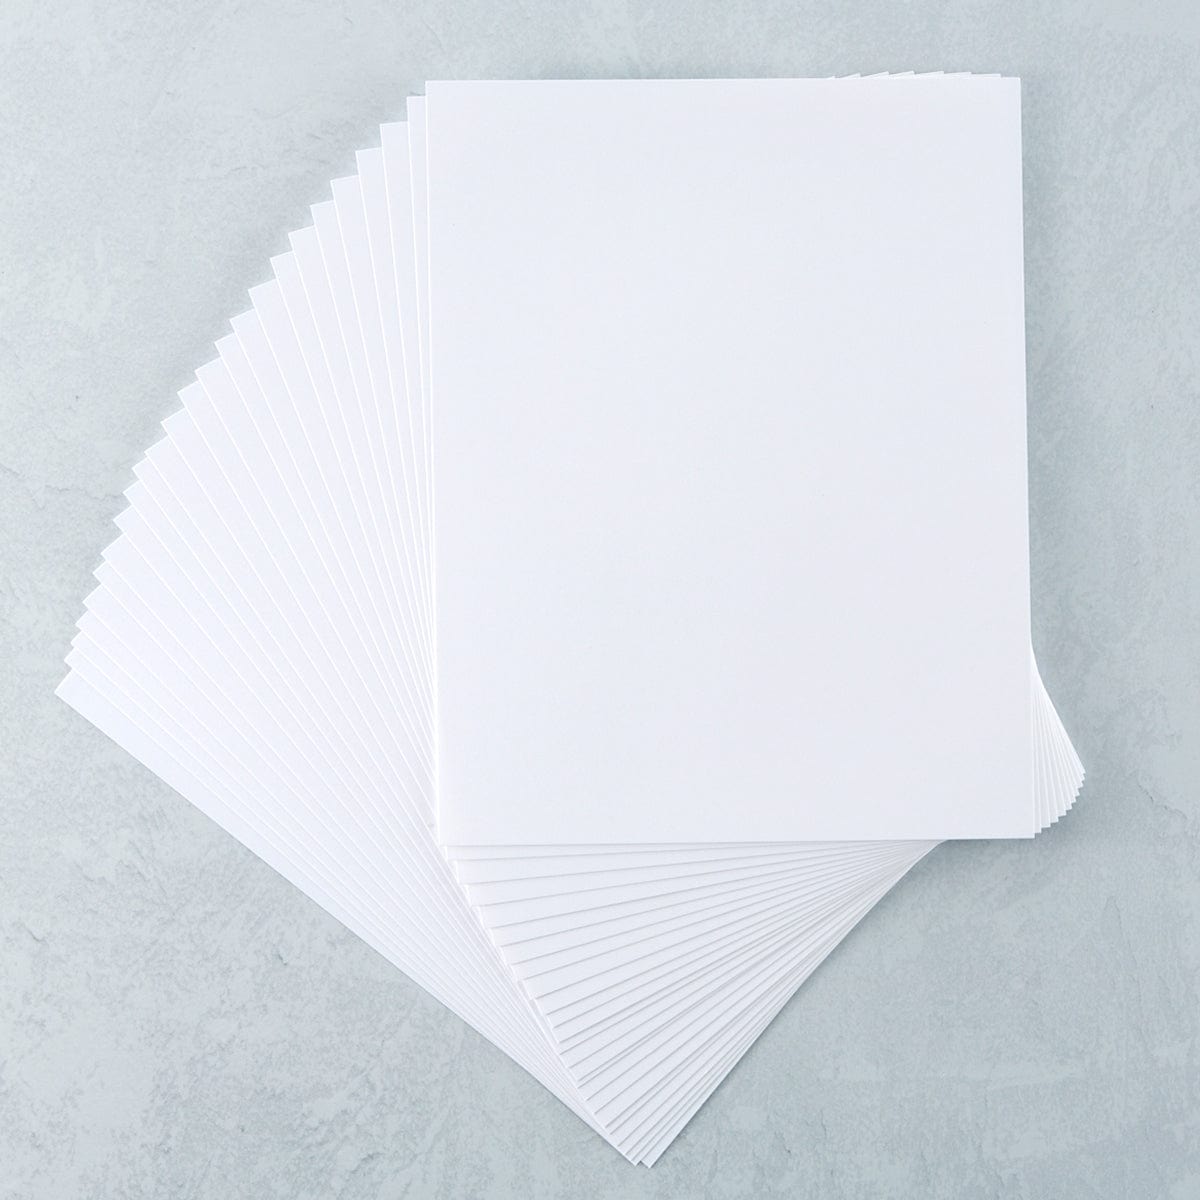 CLASSIC CREST 8 1/2 x 11 Cover Solar White Card Stock